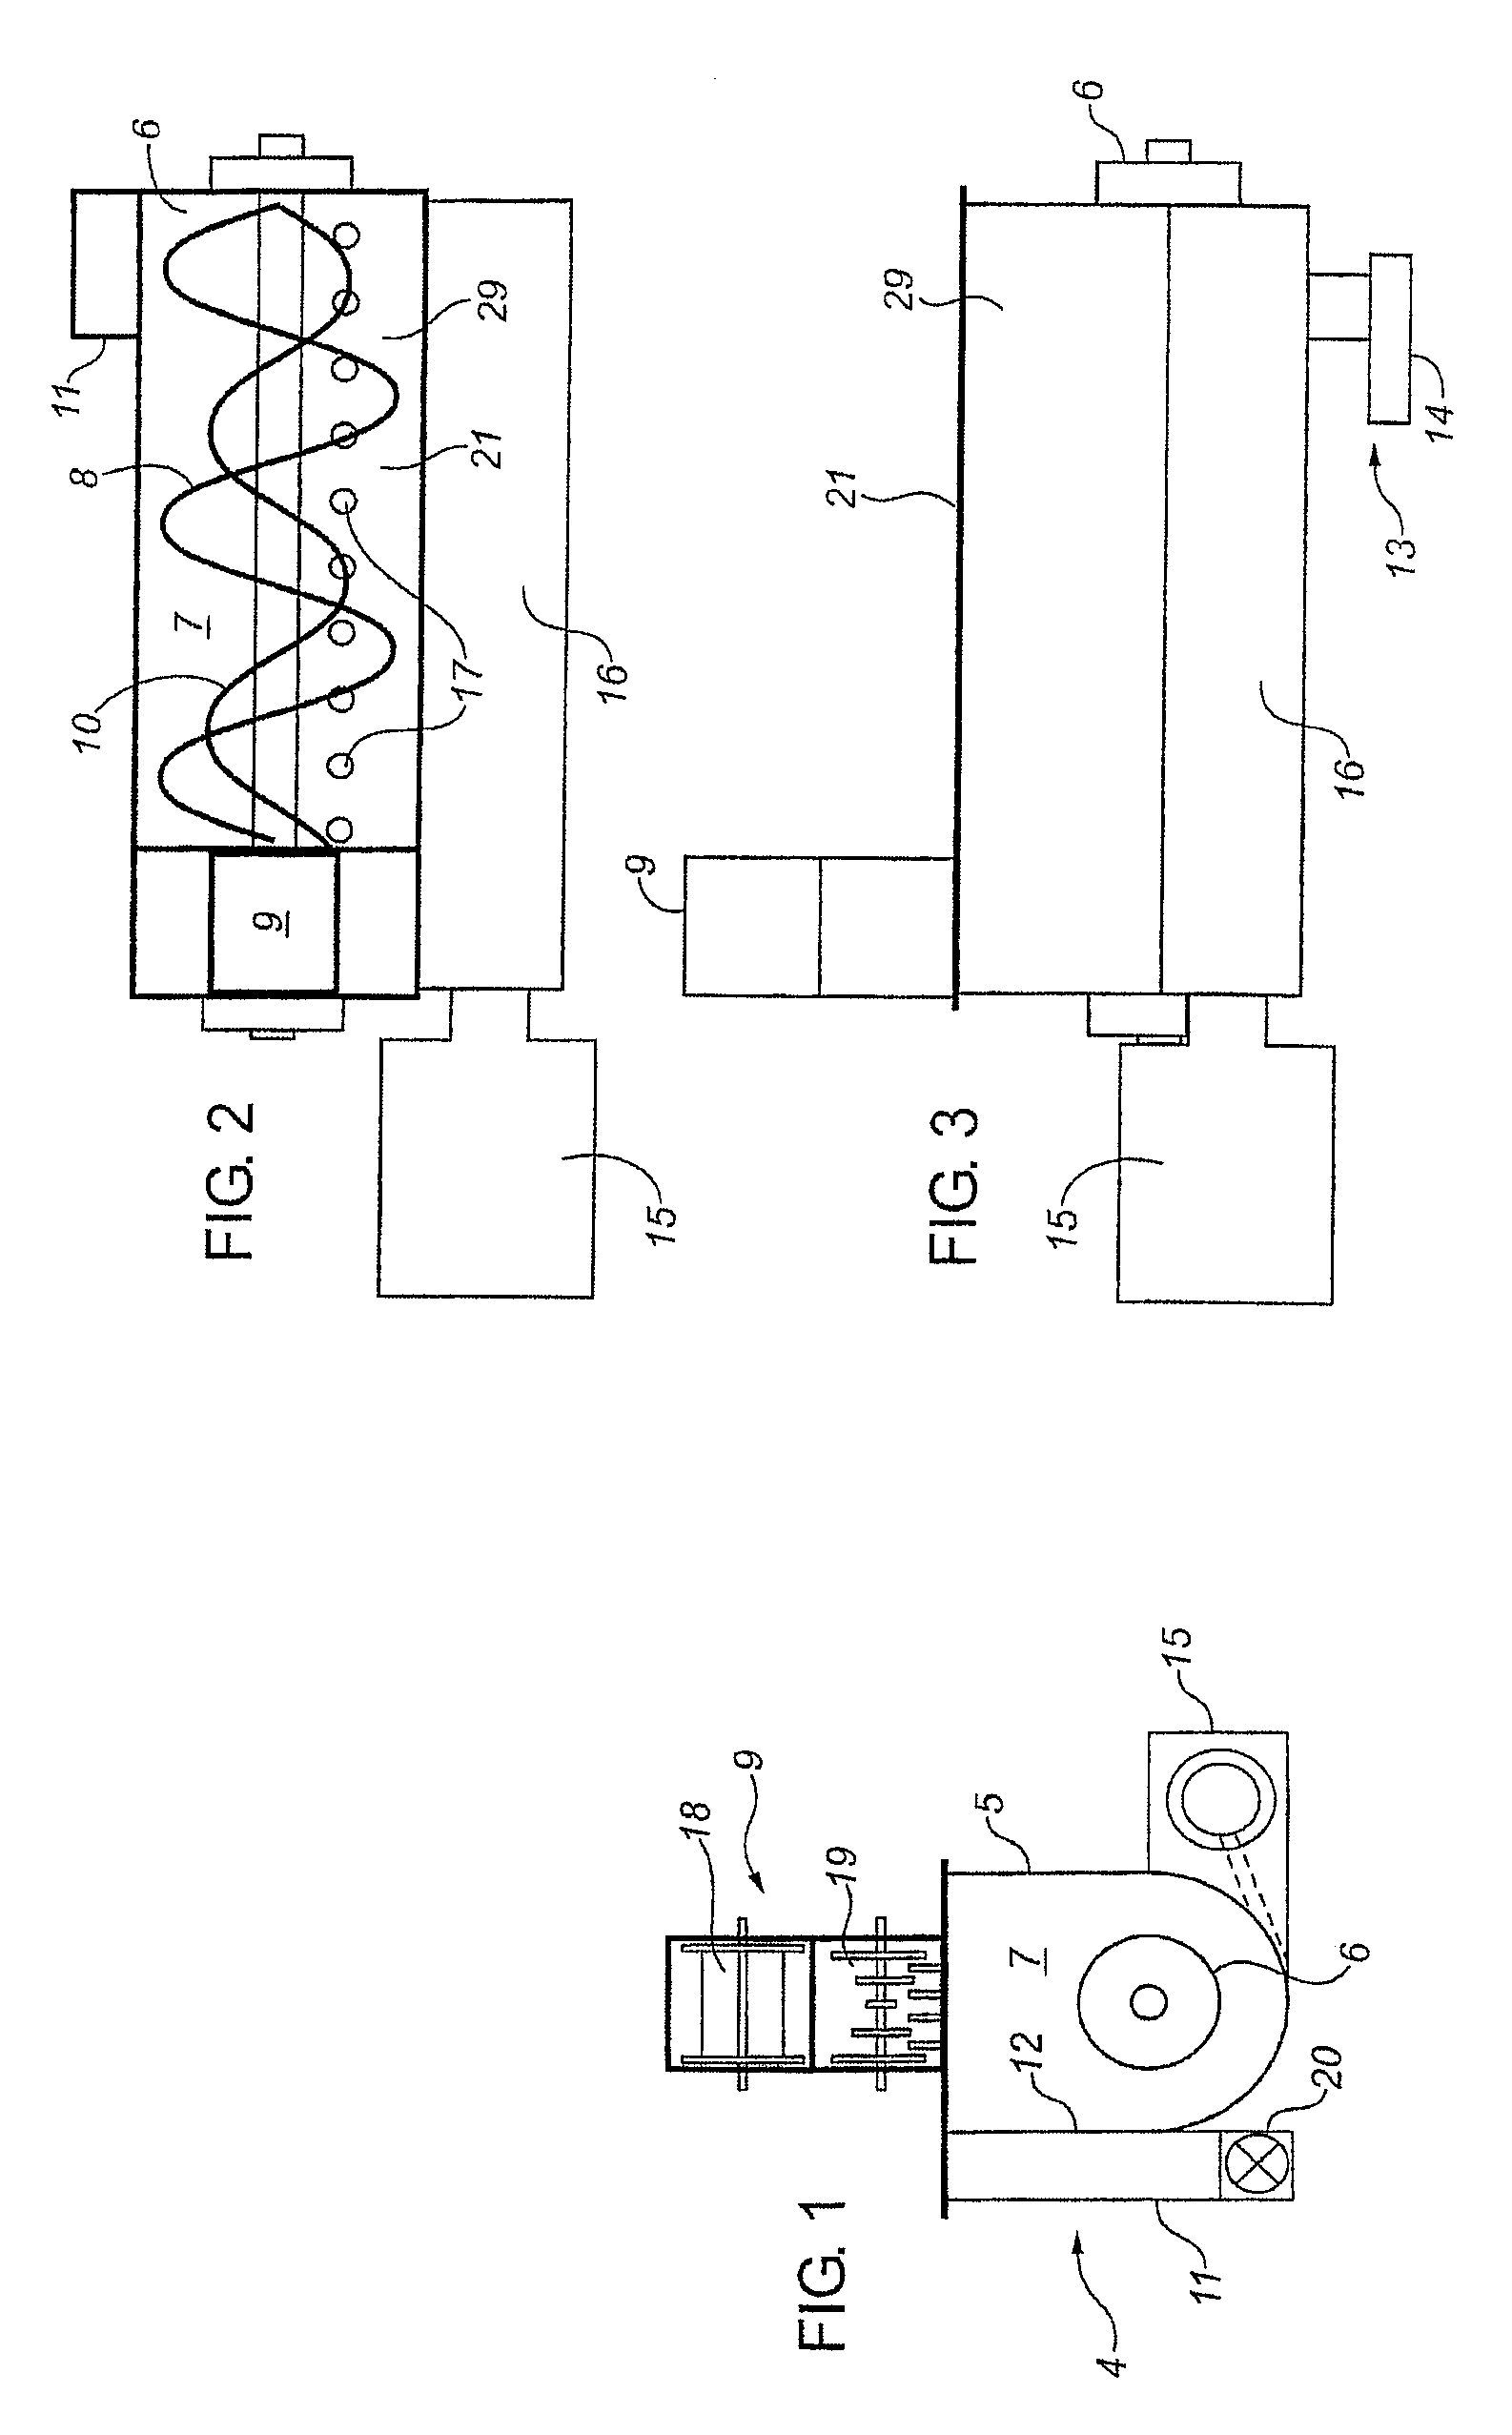 Apparatus and process for removing liquids from drill cuttings